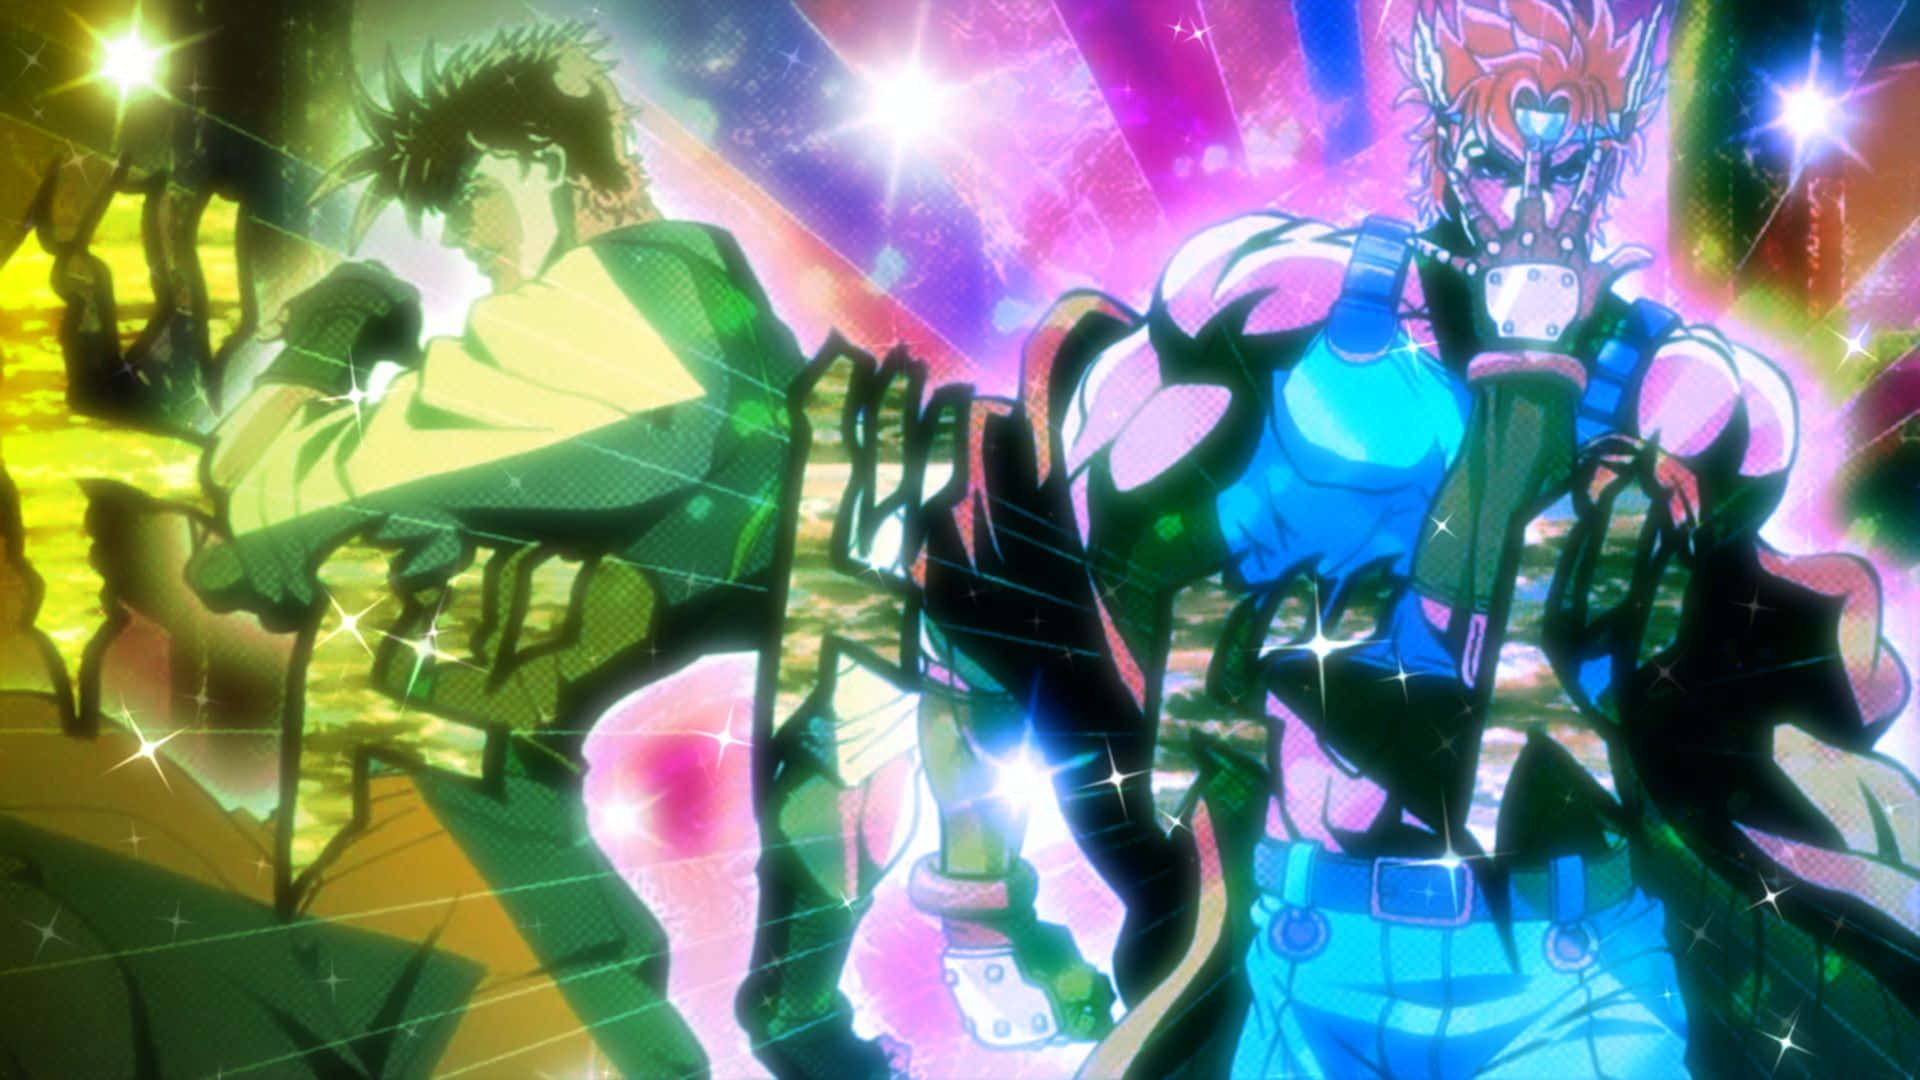 Get ready to join the adventure of JoJo's Bizarre Adventure with this epic wallpaper!